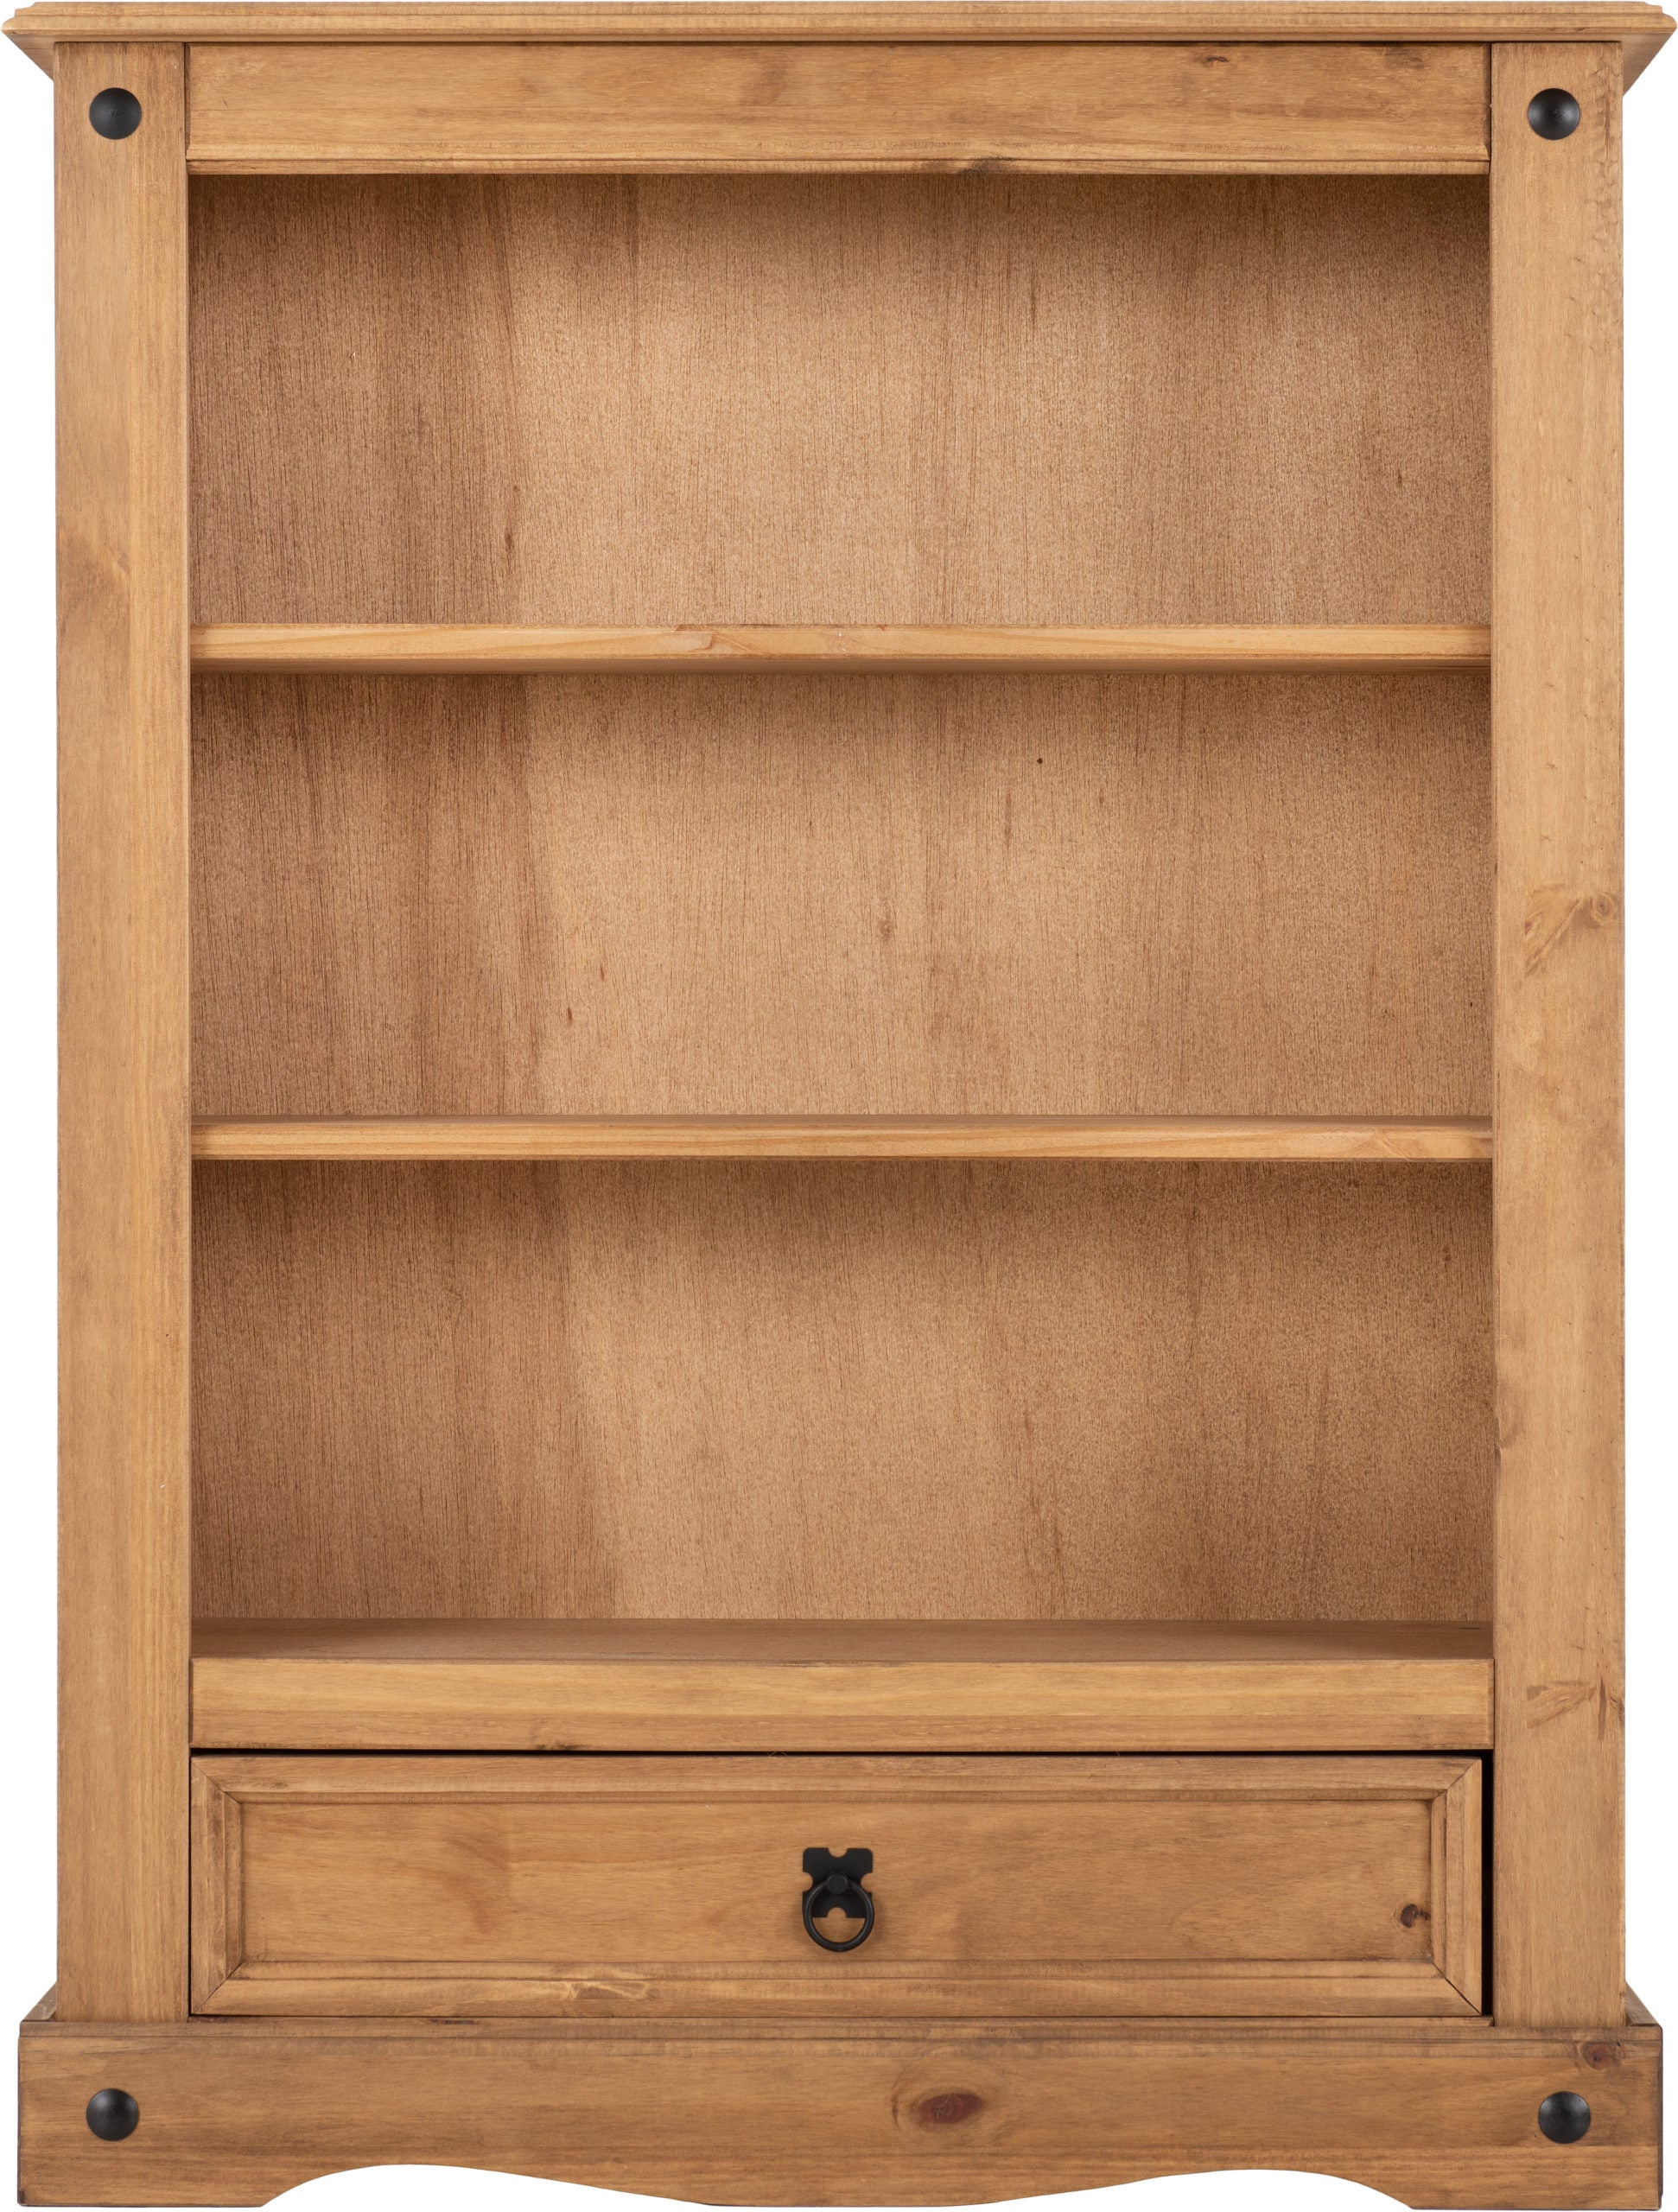 Corona 1 Drawer Bookcase - Distressed Waxed Pine - The Right Buy Store